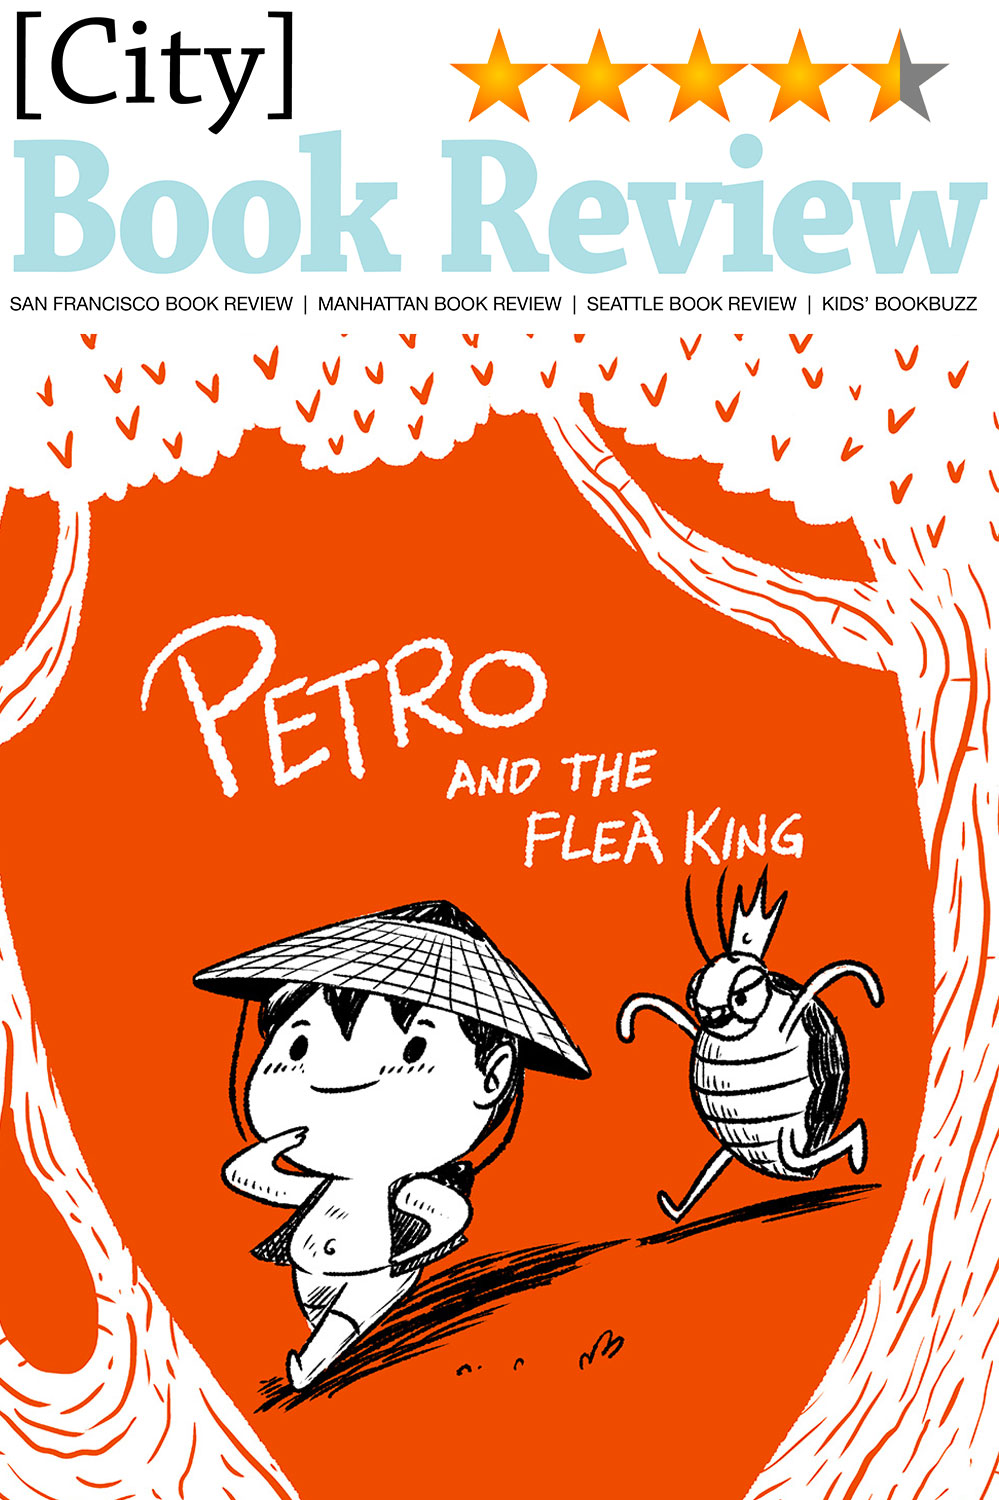 City Book Review gives Petro and the Flea King 4.5/5-Stars